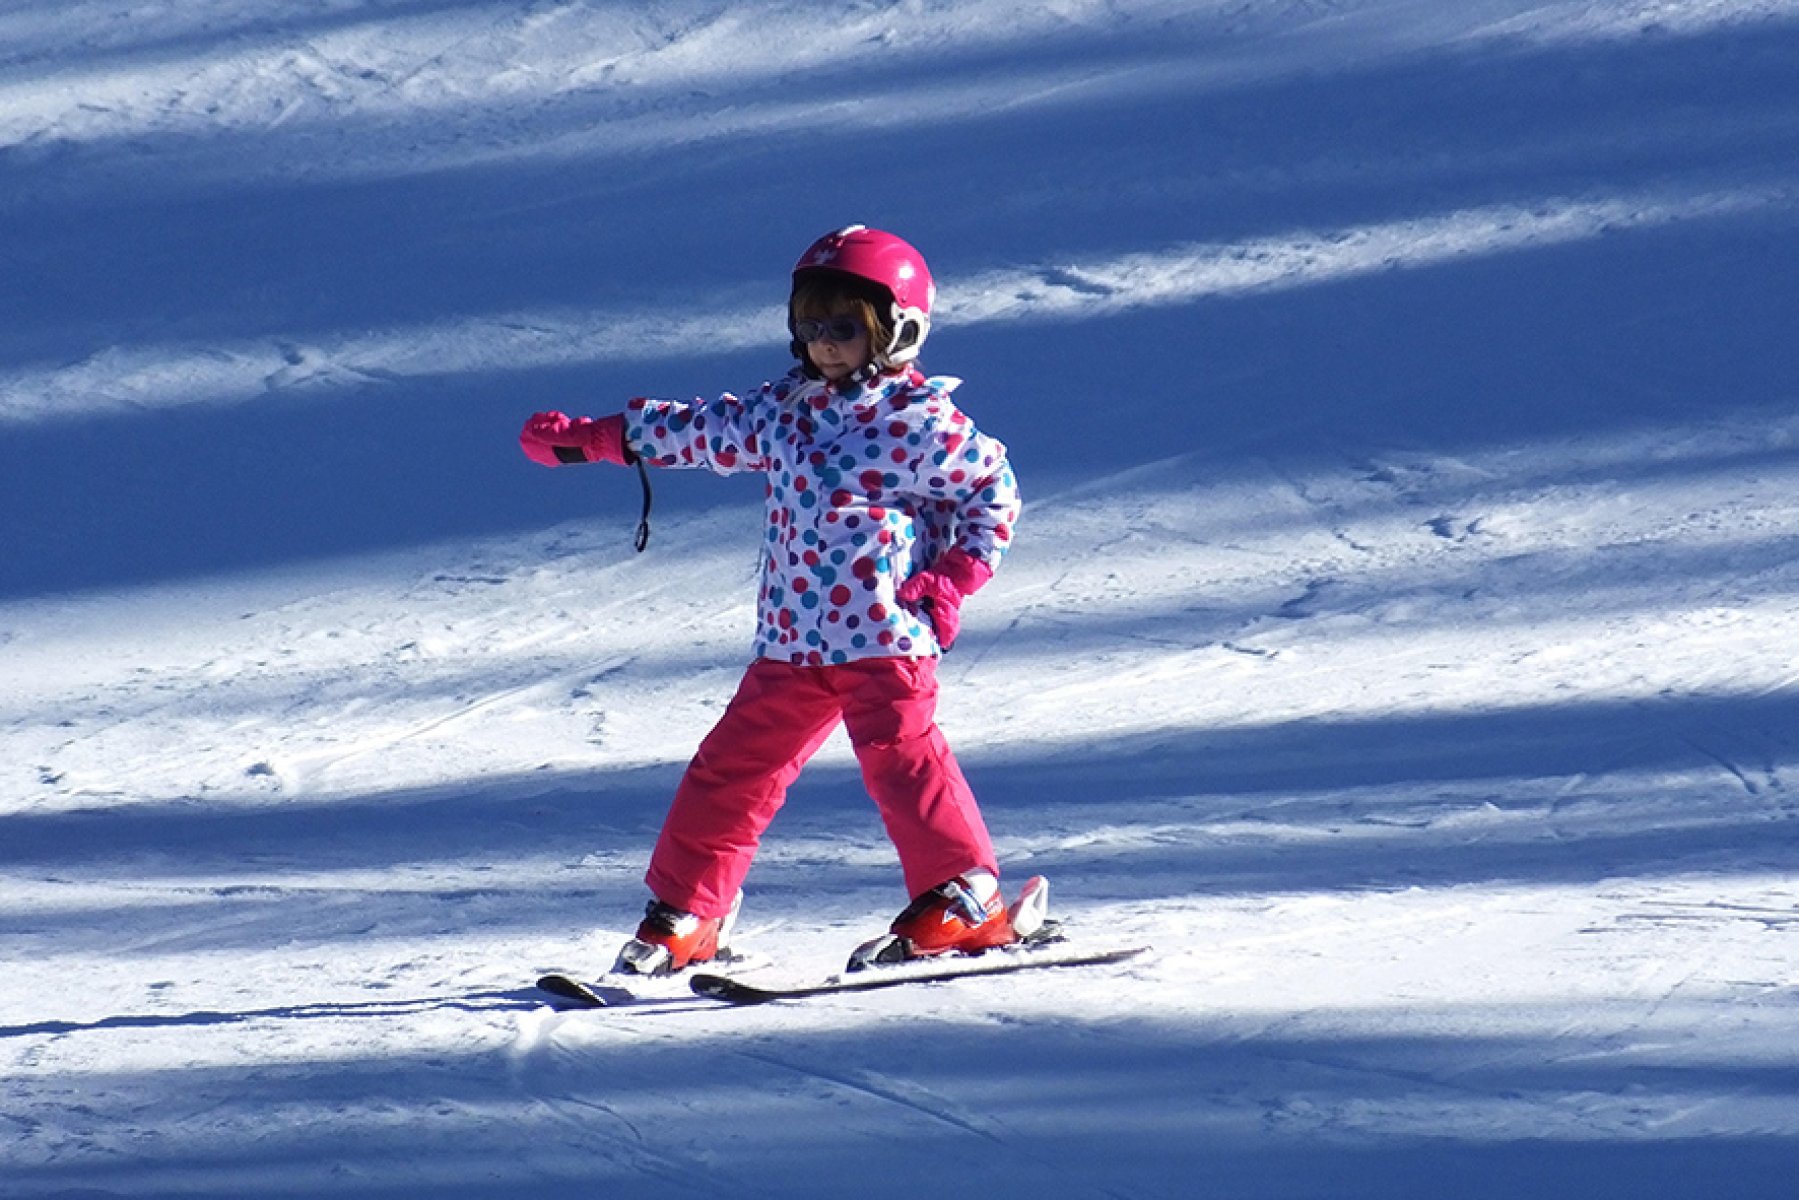 ParmaKids talks about the importance of teaching aids on the ski slopes